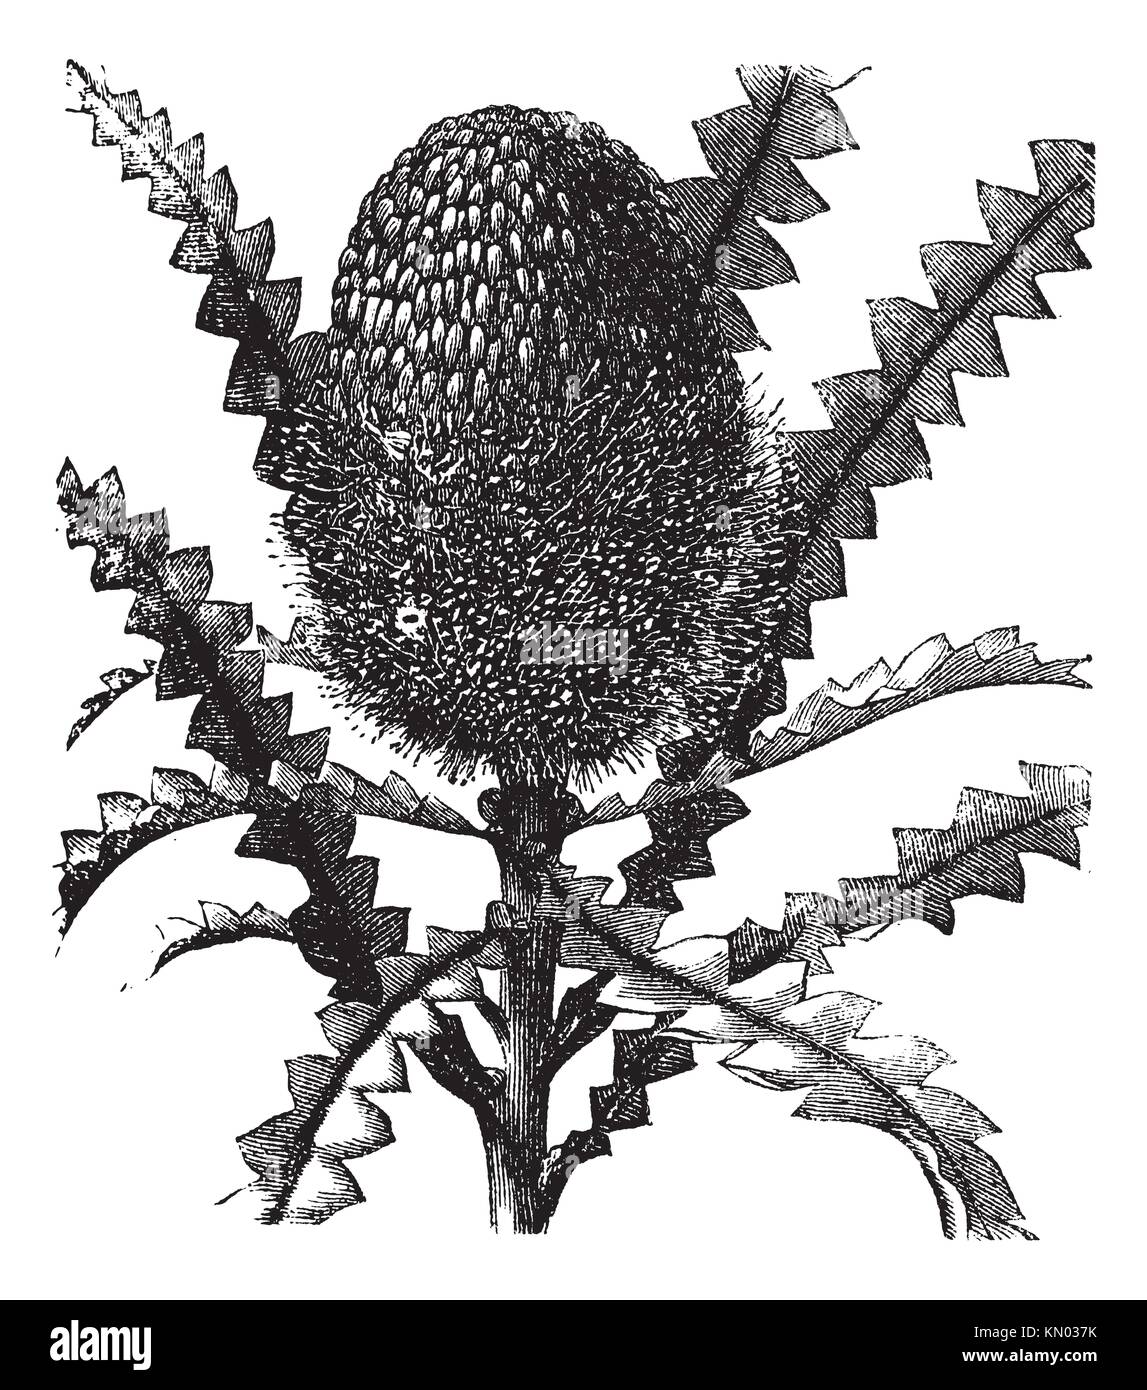 Showy Banksia or Banksia speciosa, vintage engraving  Old engraved illustration of a Showy Banksia Stock Photo